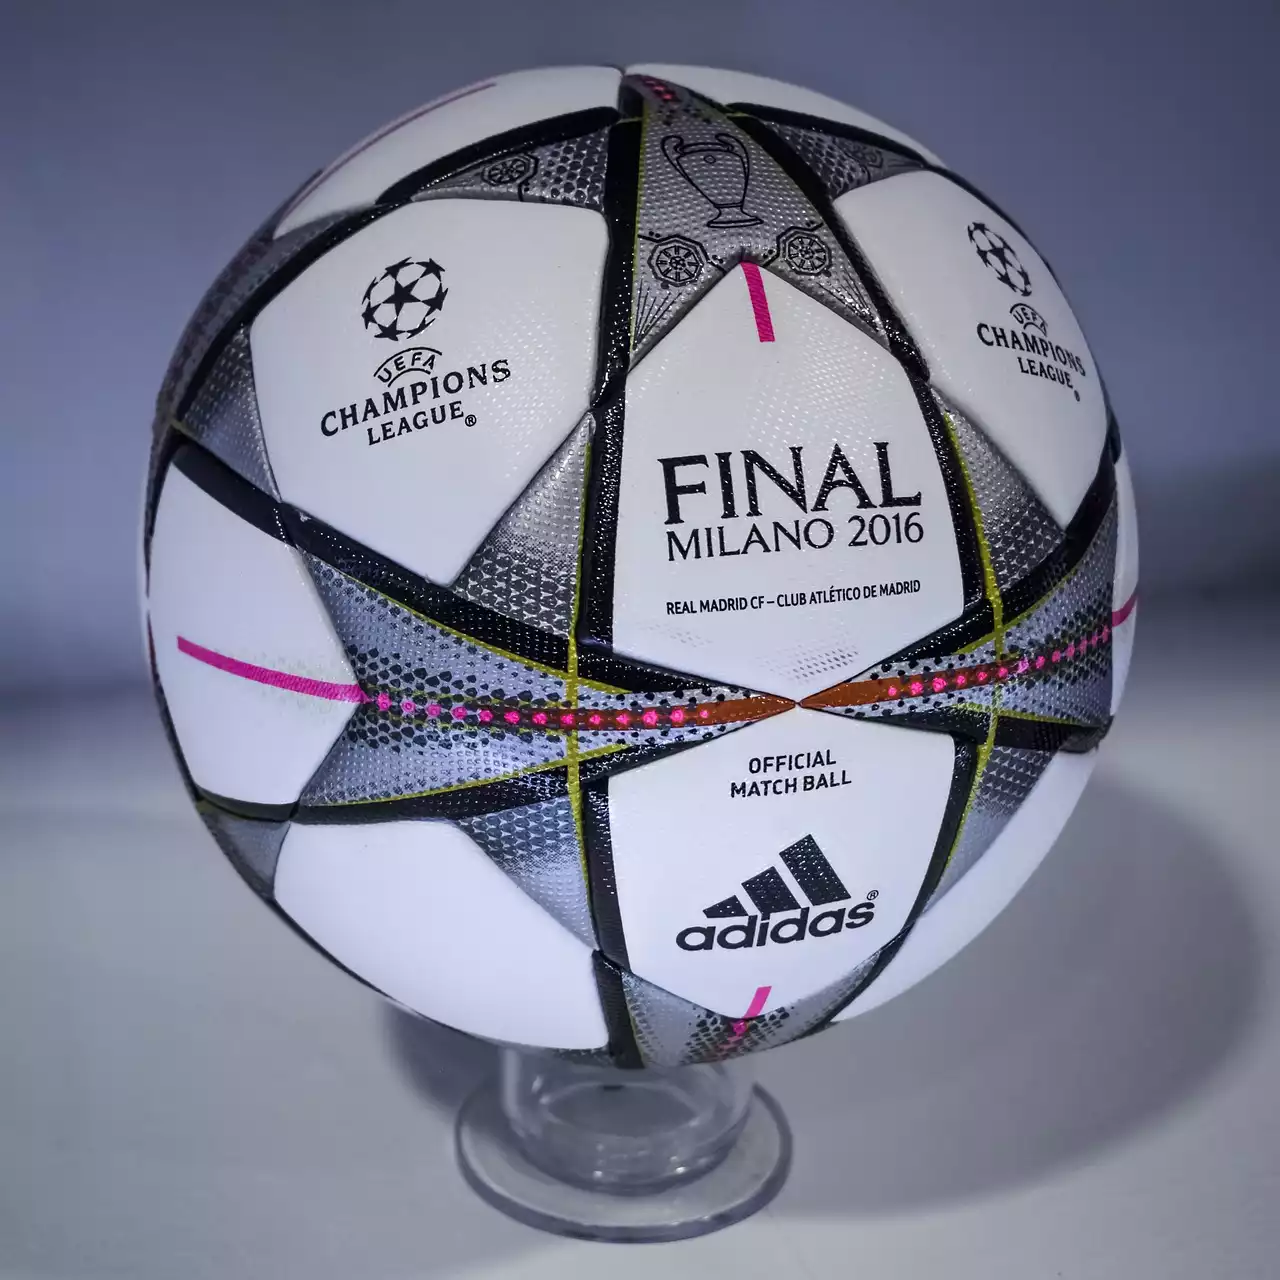 An Overview of The UEFA Champions League Competition